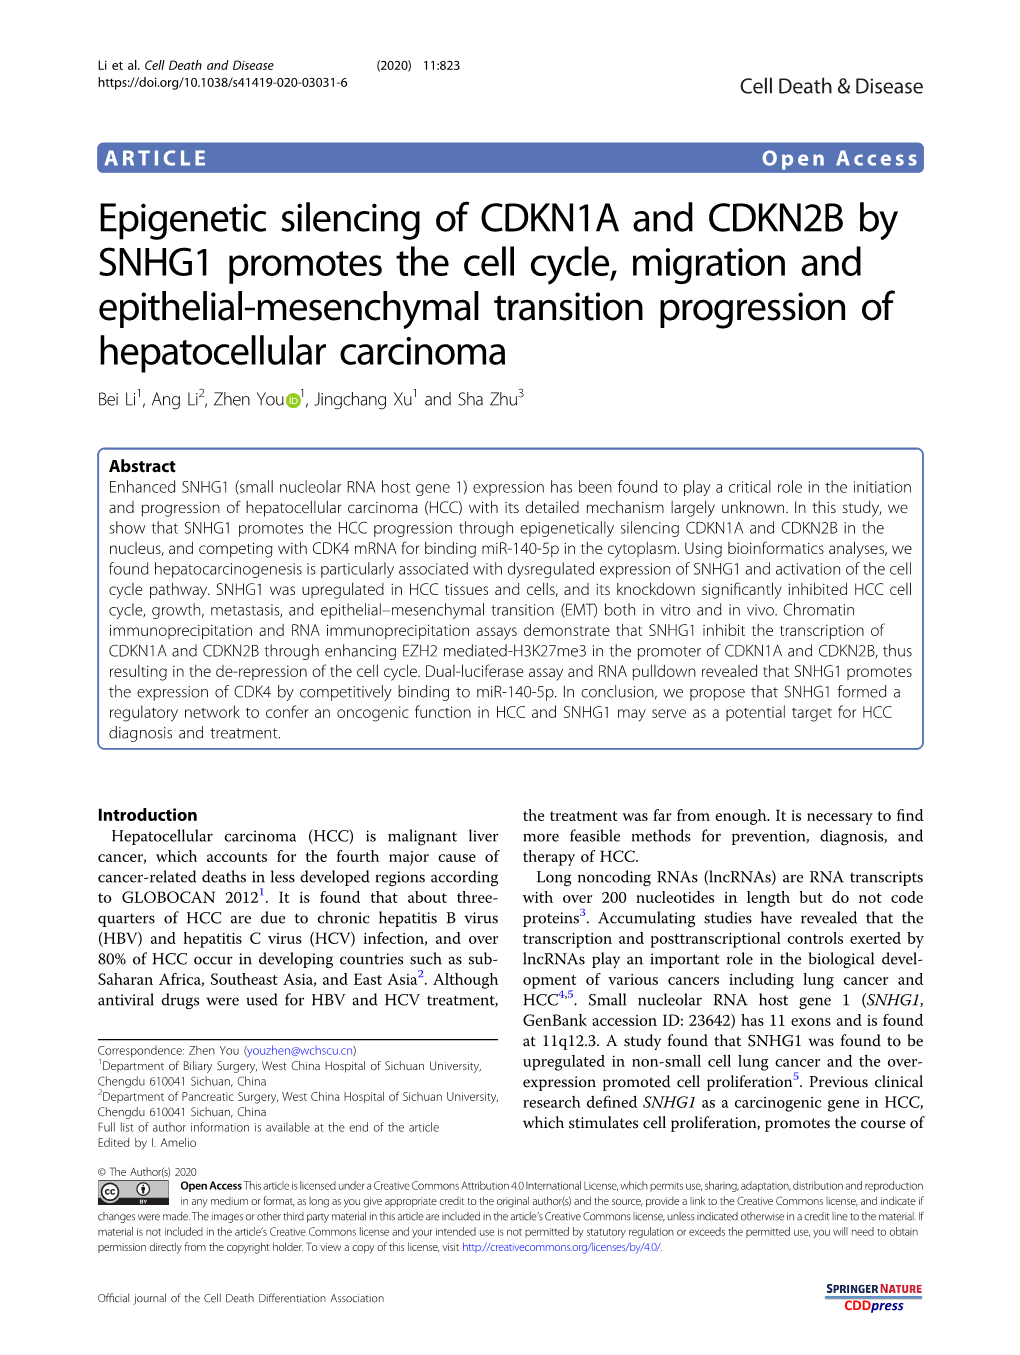 Epigenetic Silencing of CDKN1A and CDKN2B by SNHG1 Promotes The